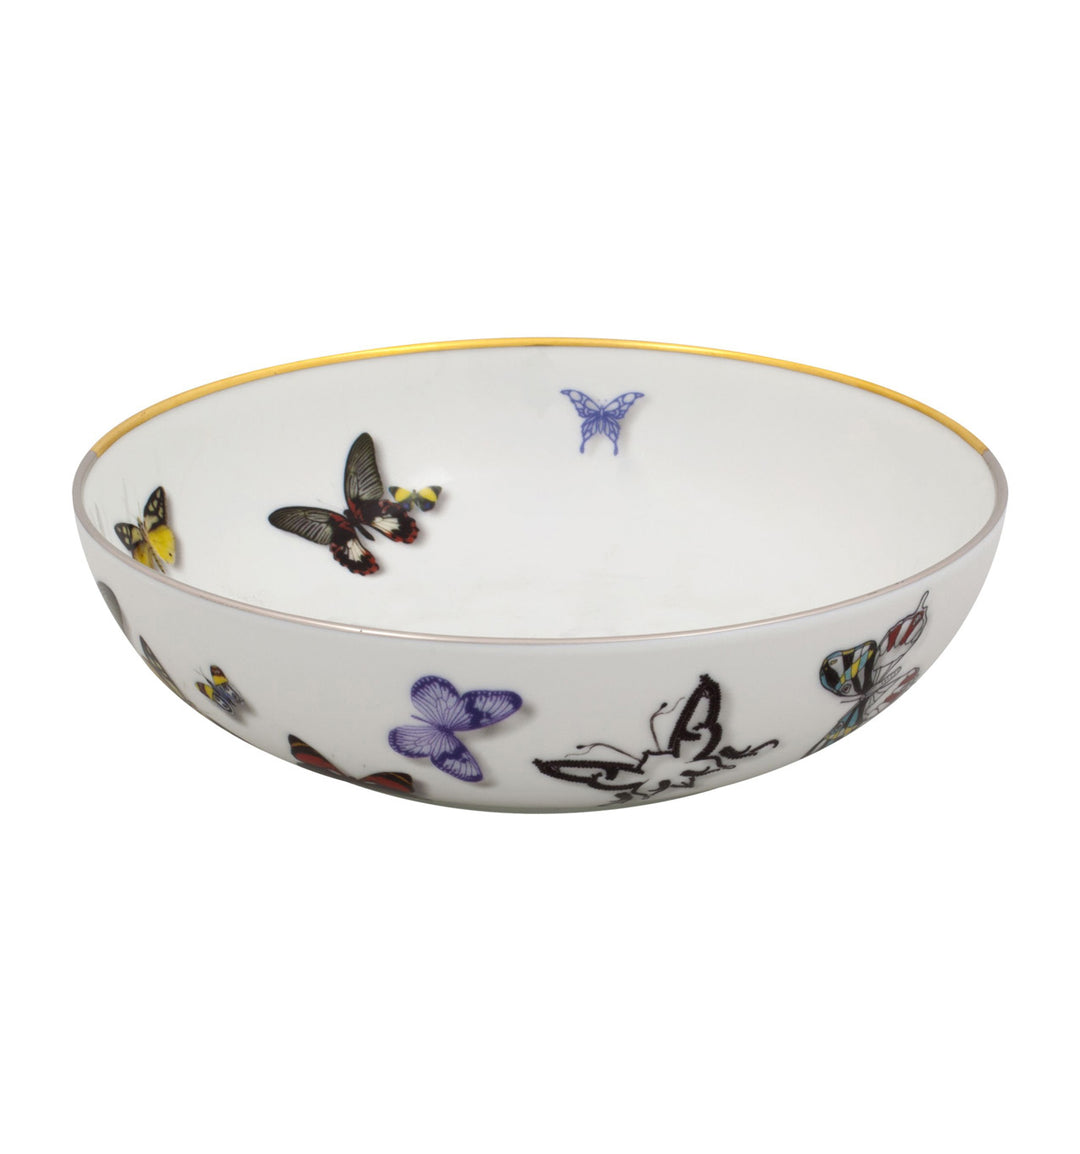 BUTTERFLY PARADE CEREAL BOWL